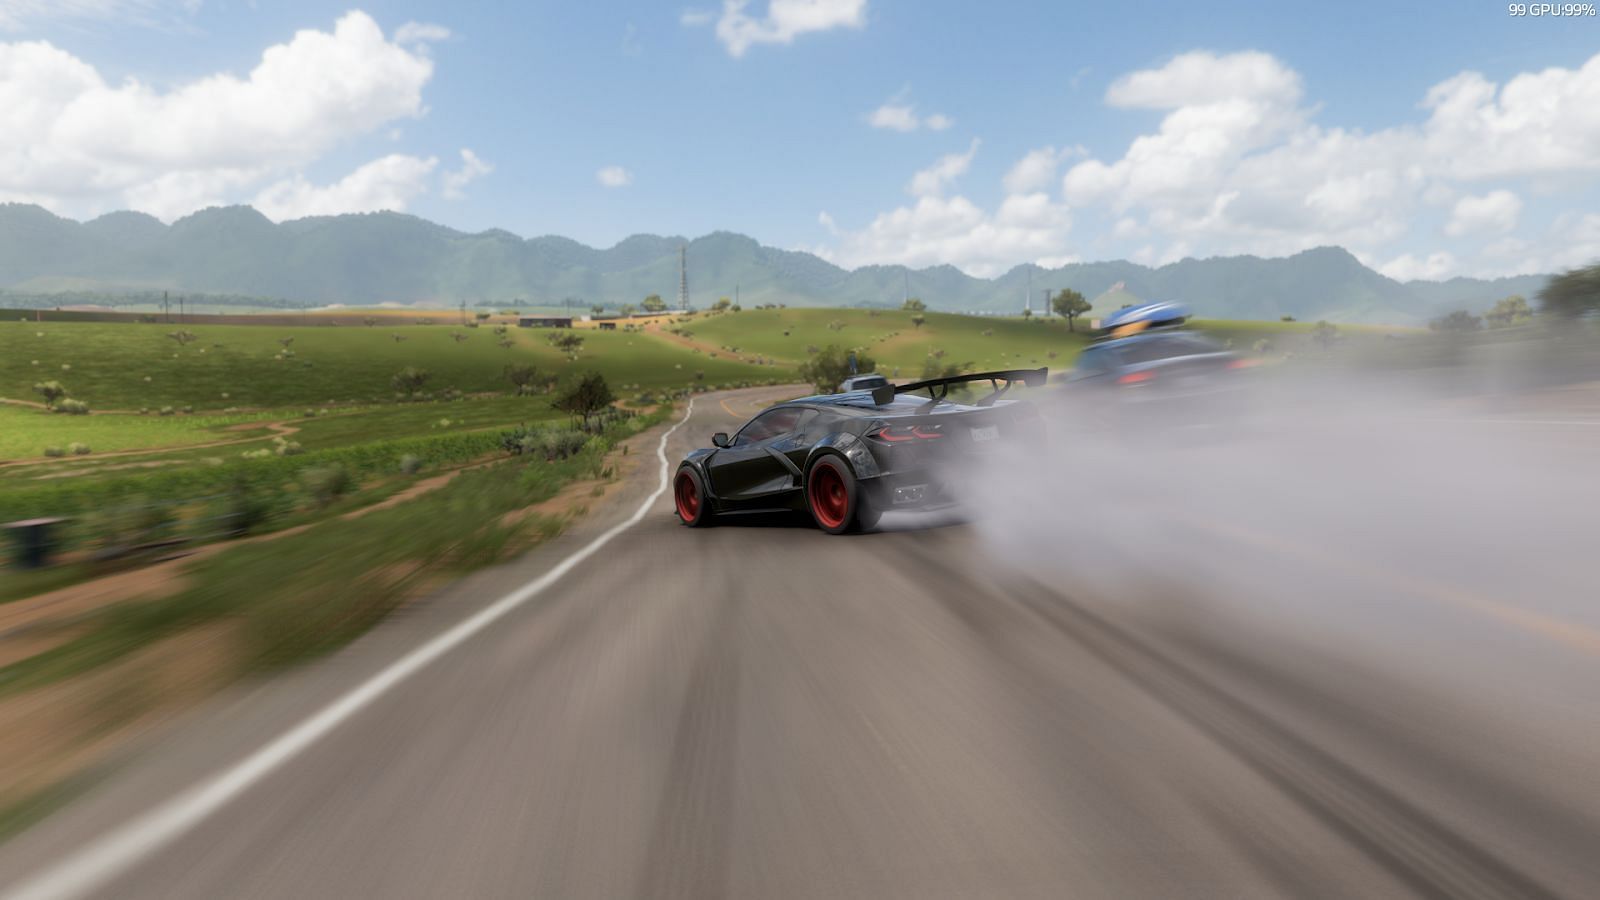 The game's beautiful sceneries and smoky tires is the perfect combo (Screengrab from Forza Horizon 5)